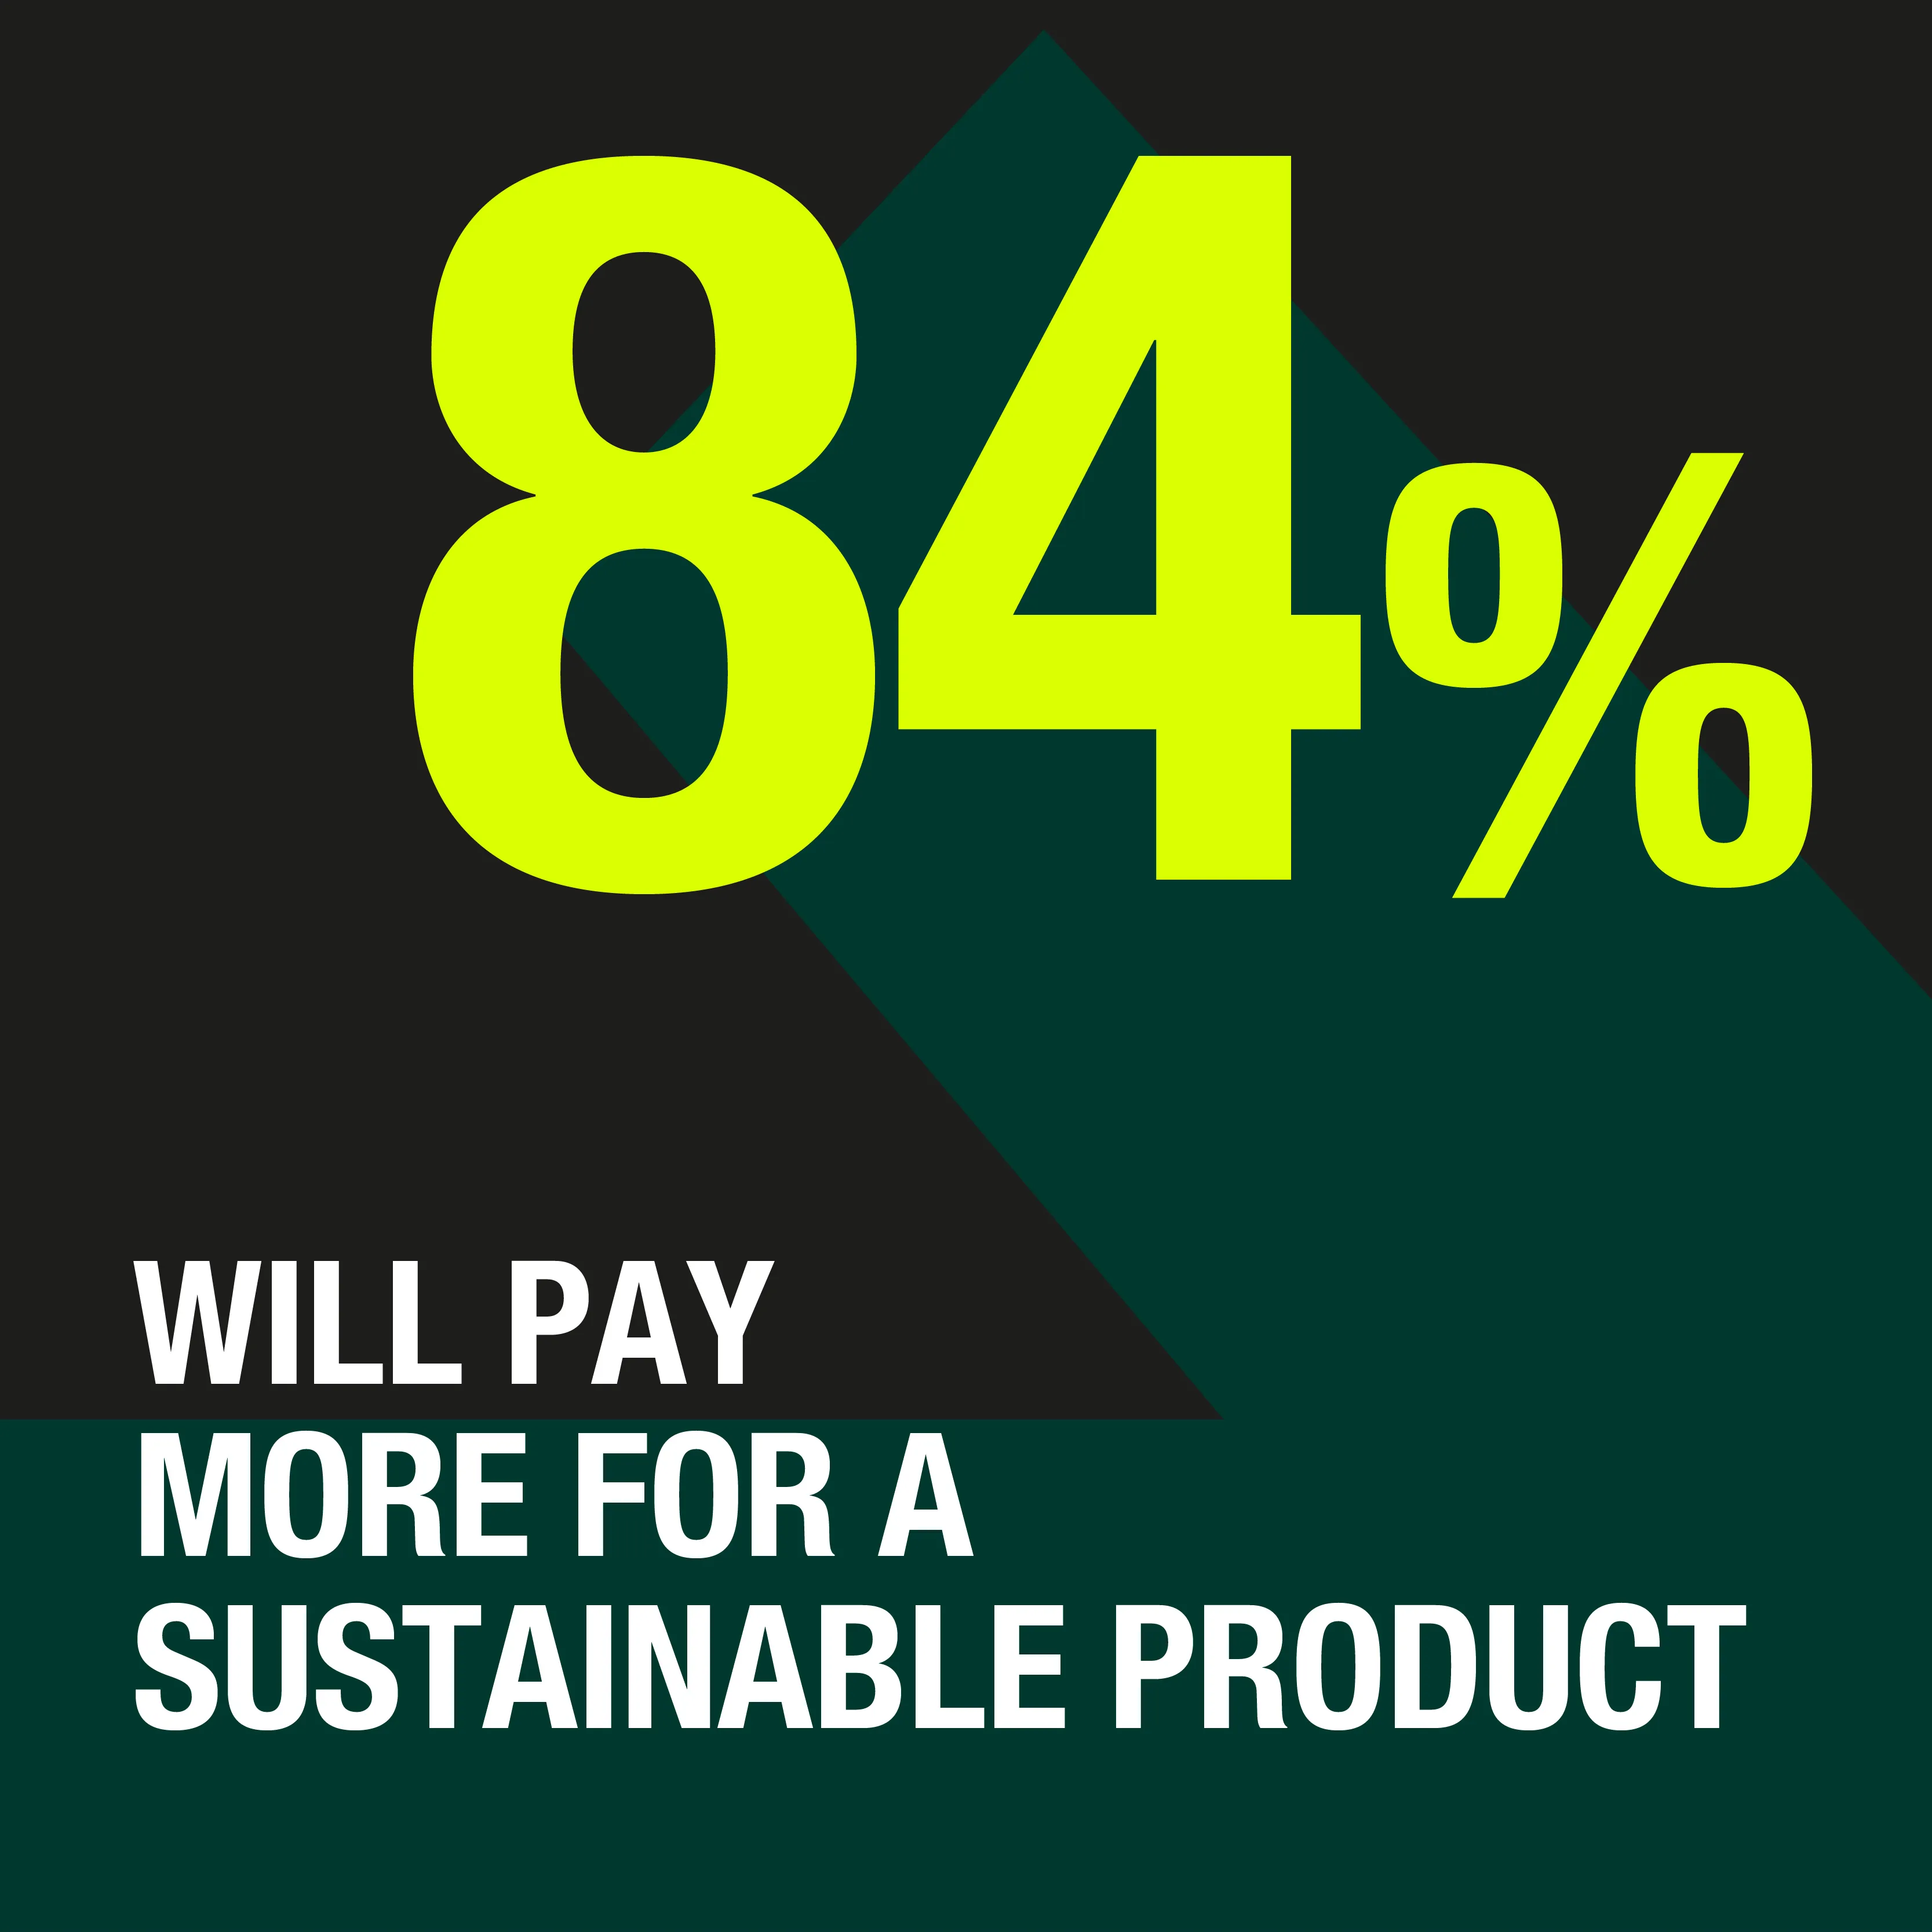 84% will pay more for sustainable products